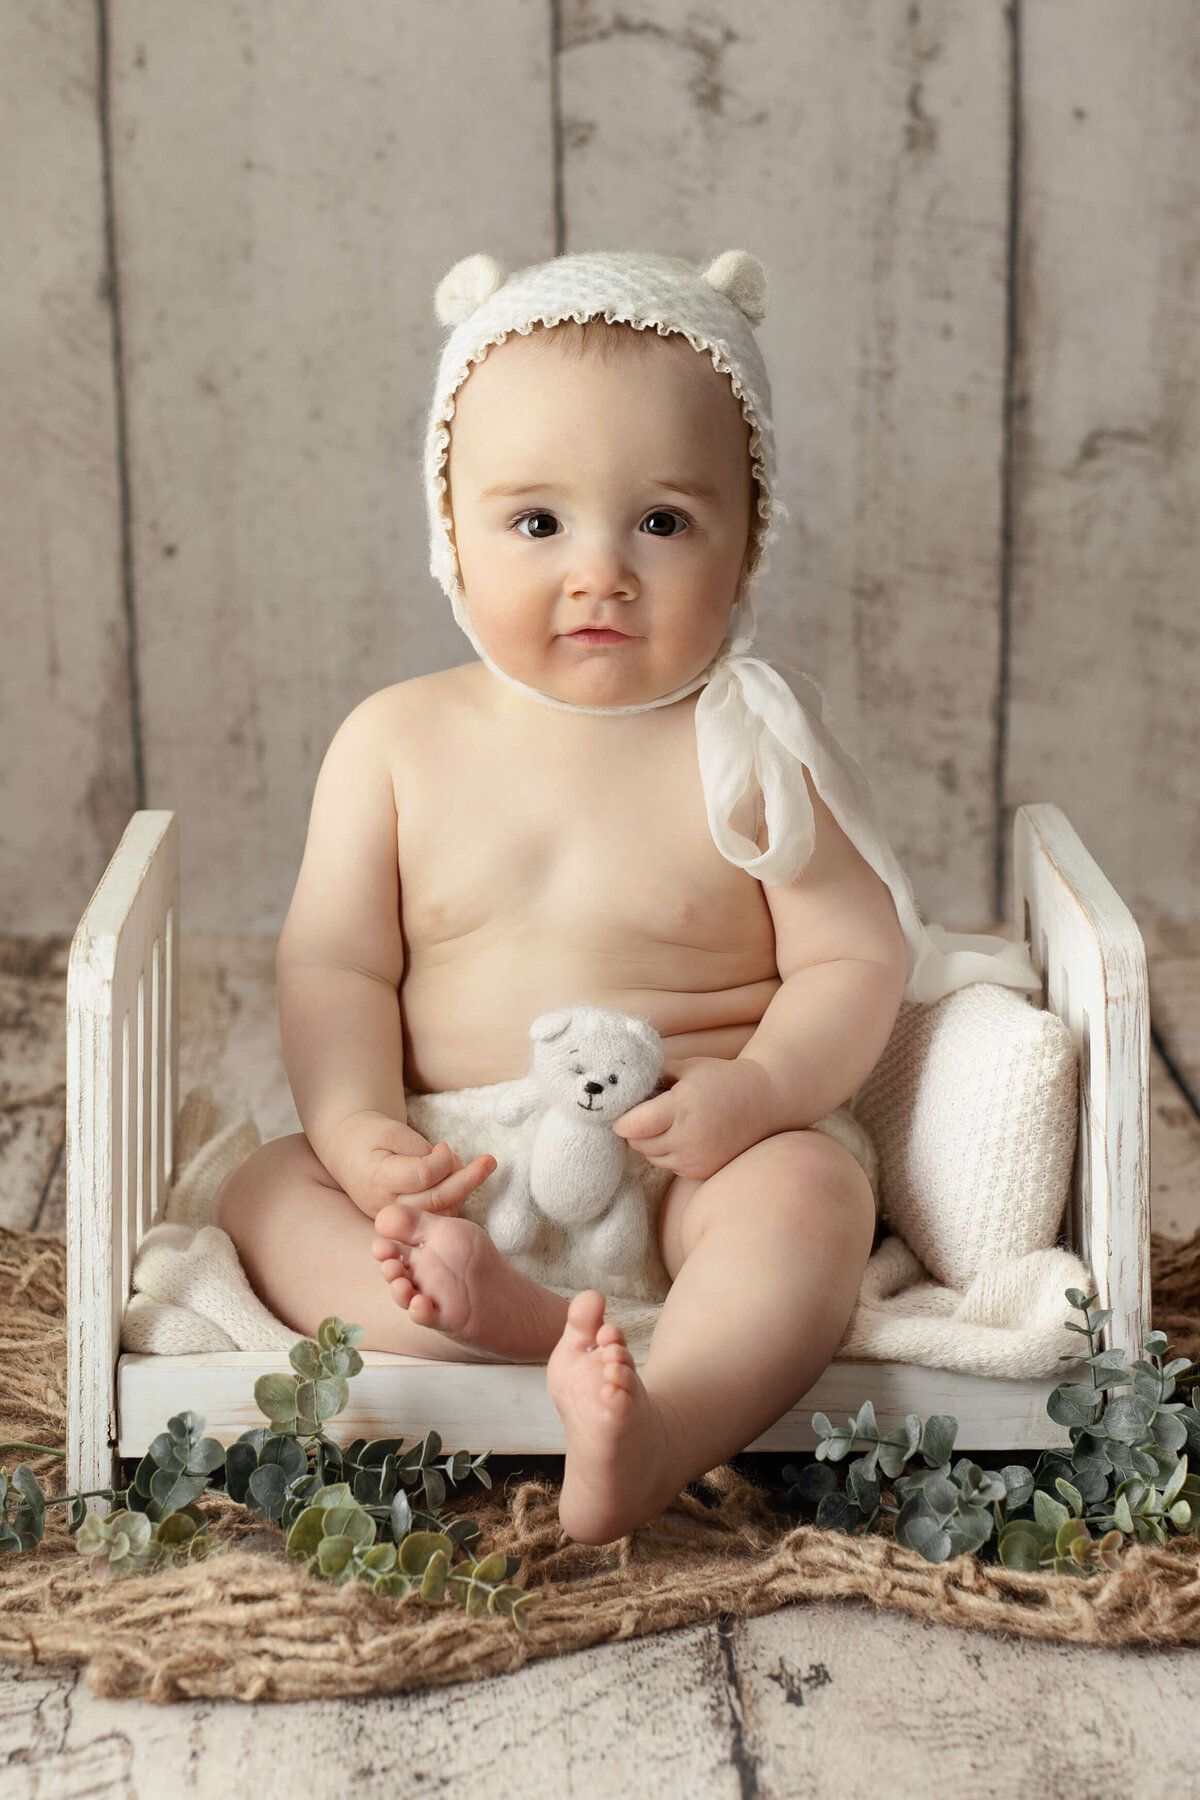 5 month old toddler wearing a bear bonnet sitting on a white wooden bed holding a white bear in front of a white wooden backdrop